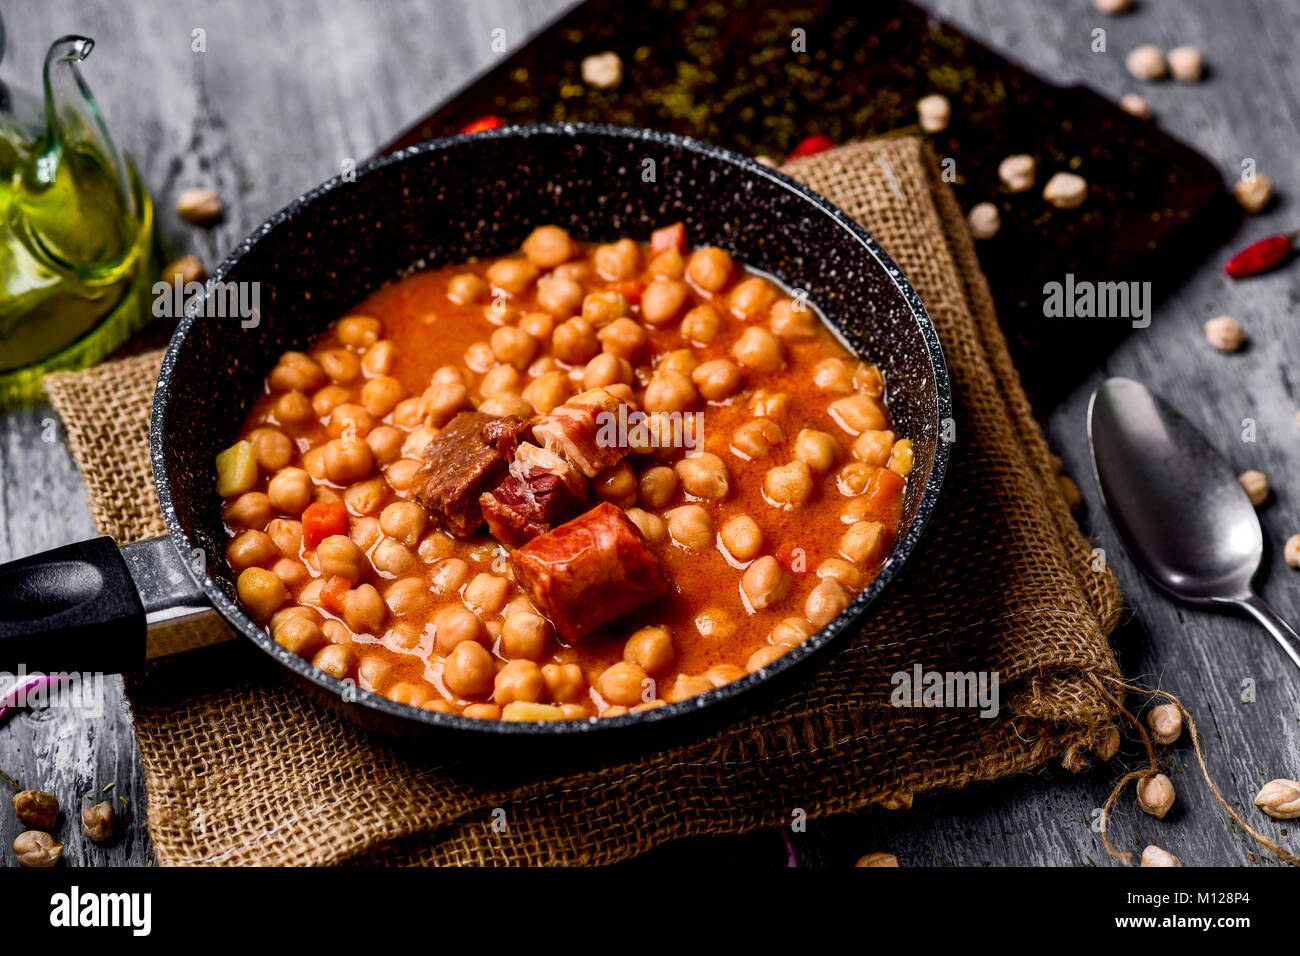 a stone frypan with garbanzos a la riojana, a spanish chickpeas stew, on a wooden chopping board placed on a rustic wooden table next to a cruet with  Stock Photo